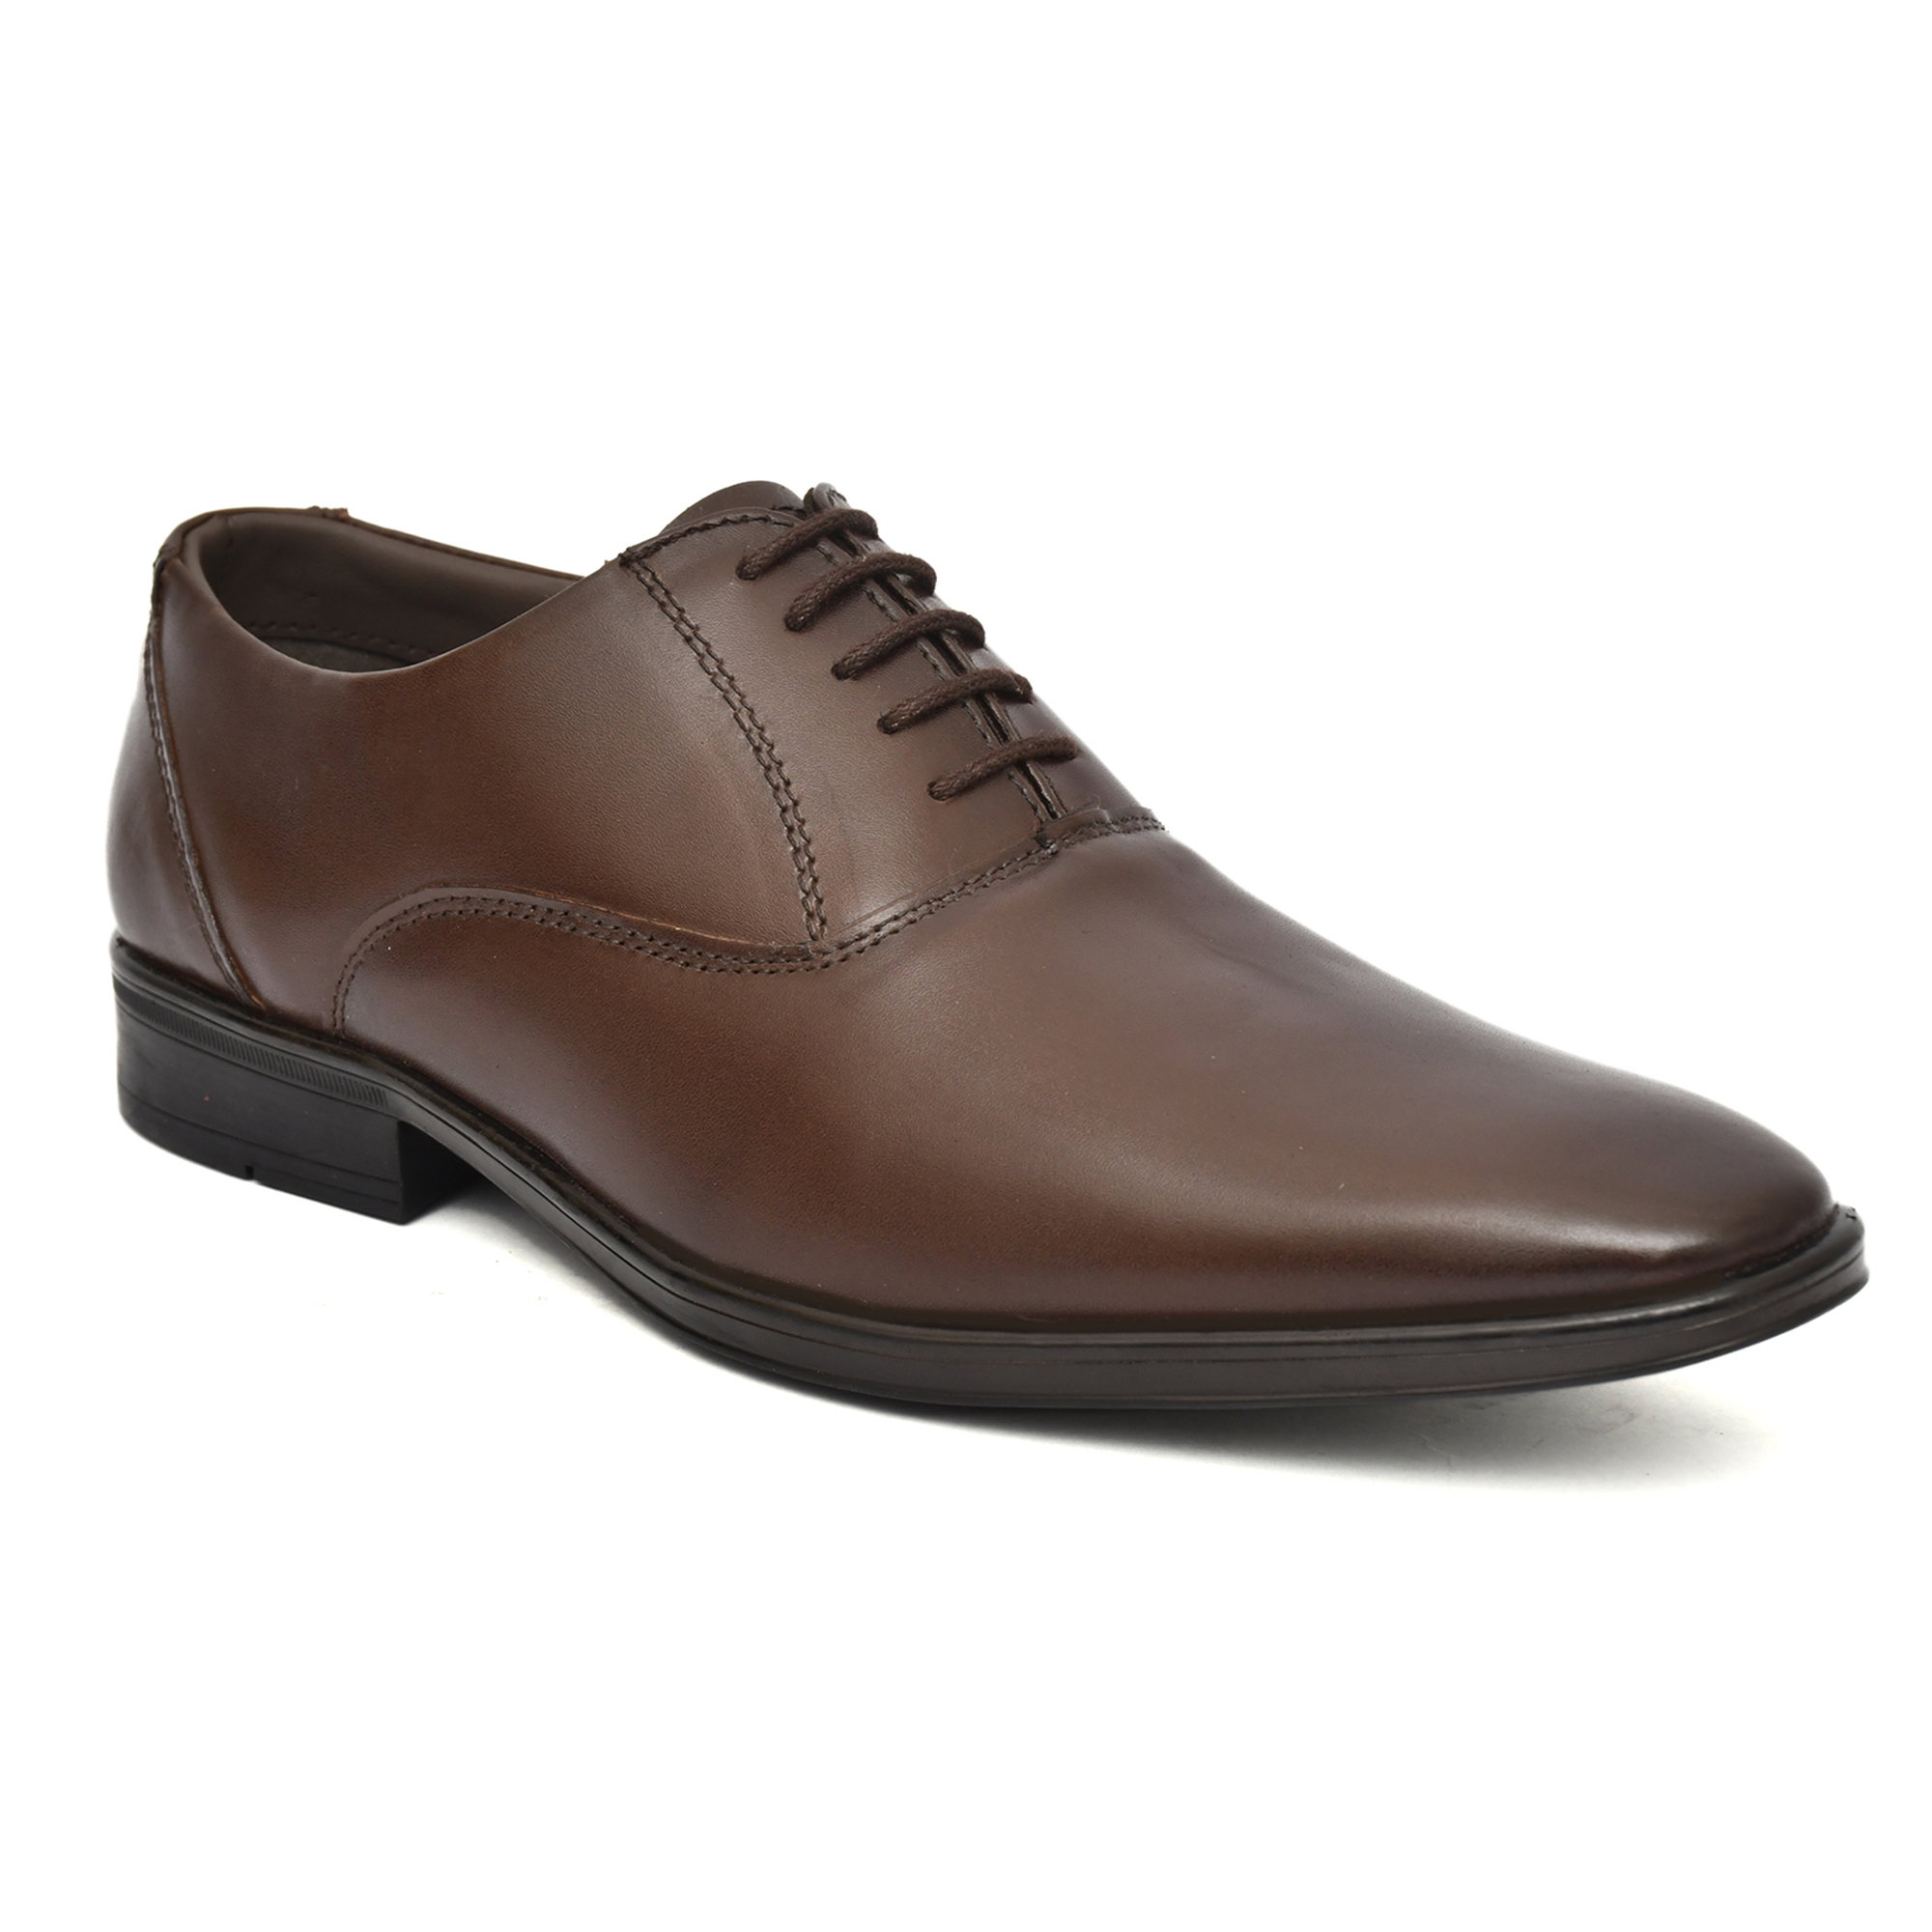 Brown leather Oxford shoes for Men with Memory foam footpad by asm.